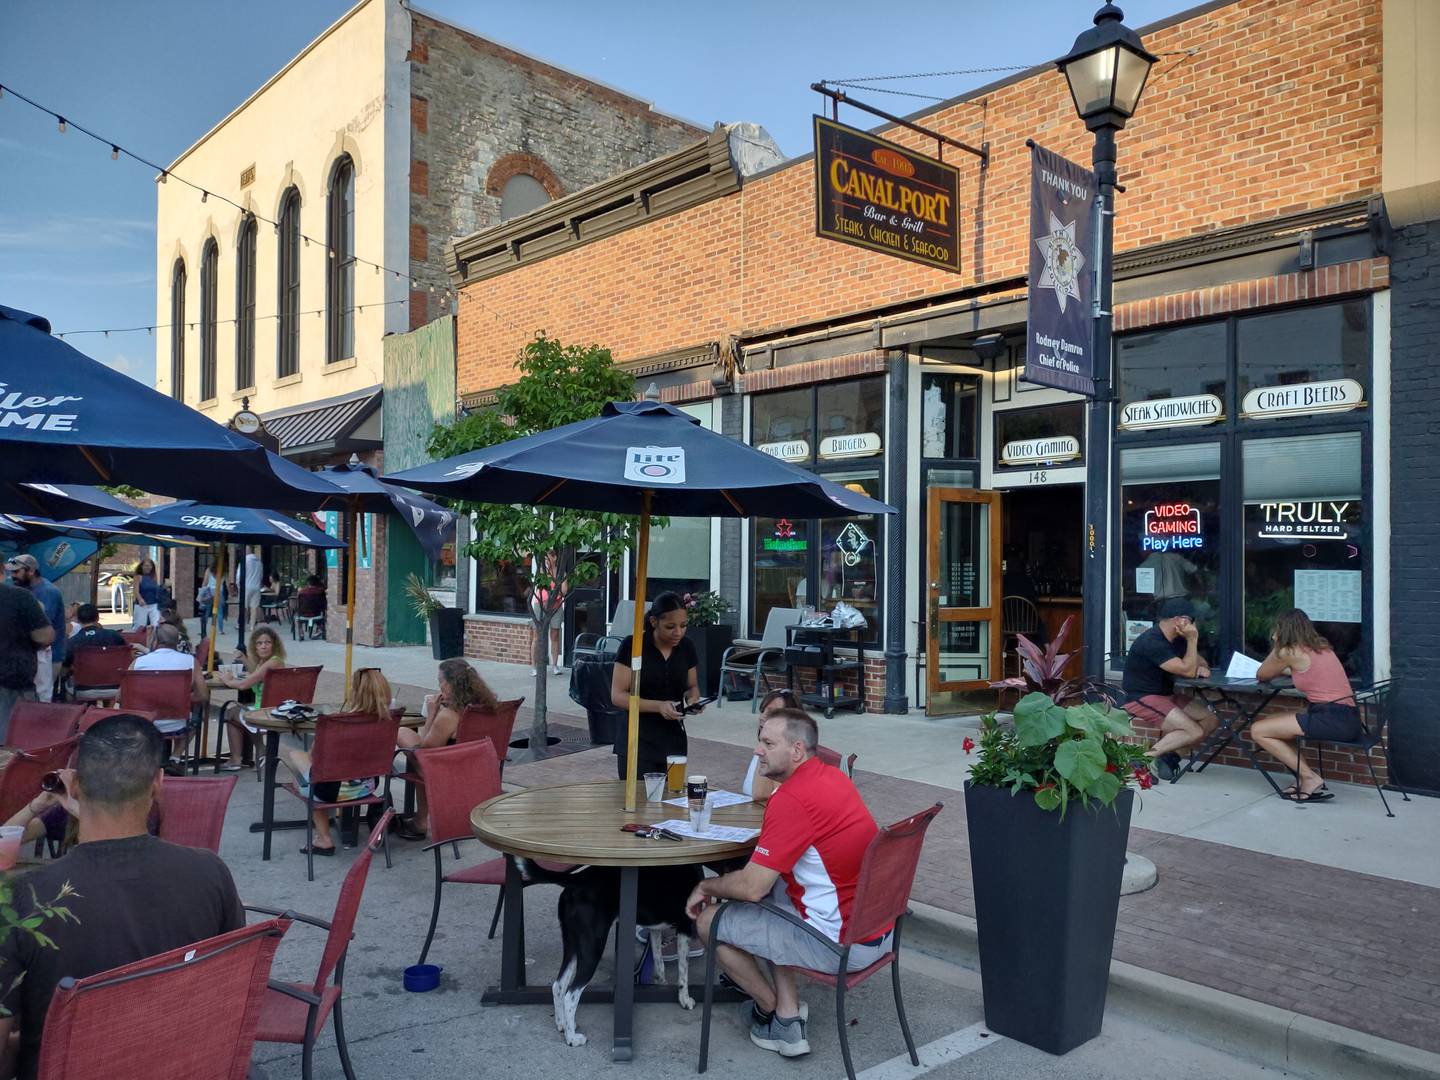 Plenty of diners opted to sit outside on Mill Street in downtown Utica, which was an option at Canal Port.